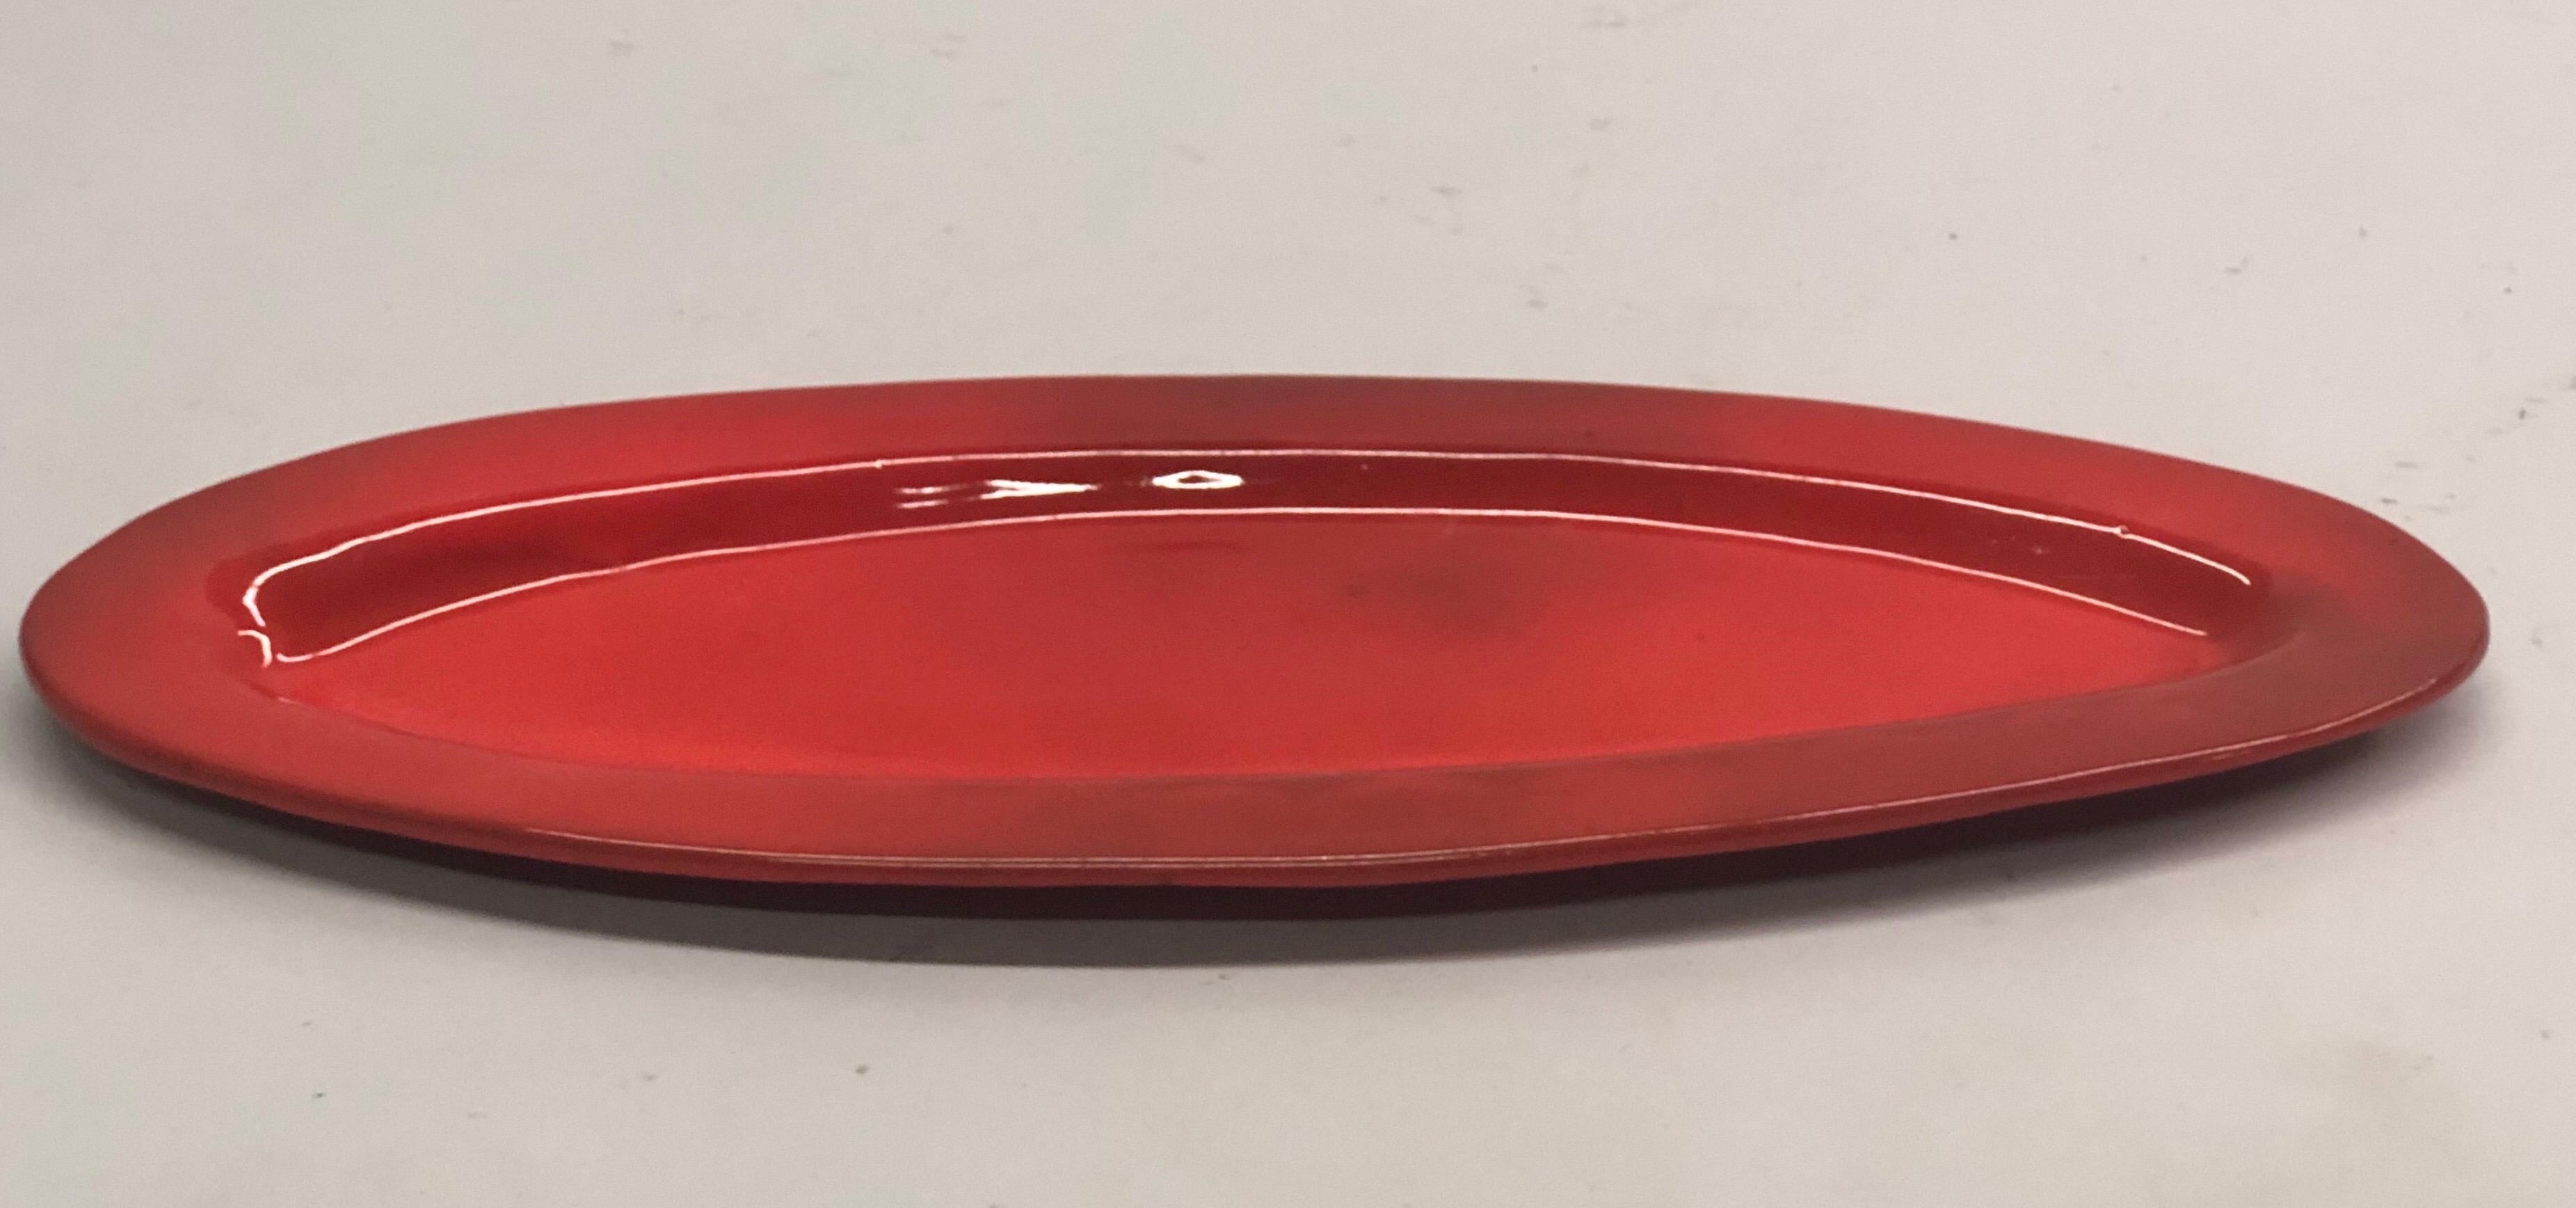 Large French Midcentury Rectangular Red Ceramic Serving Platter Voltz, Vallauris In Good Condition For Sale In New York, NY